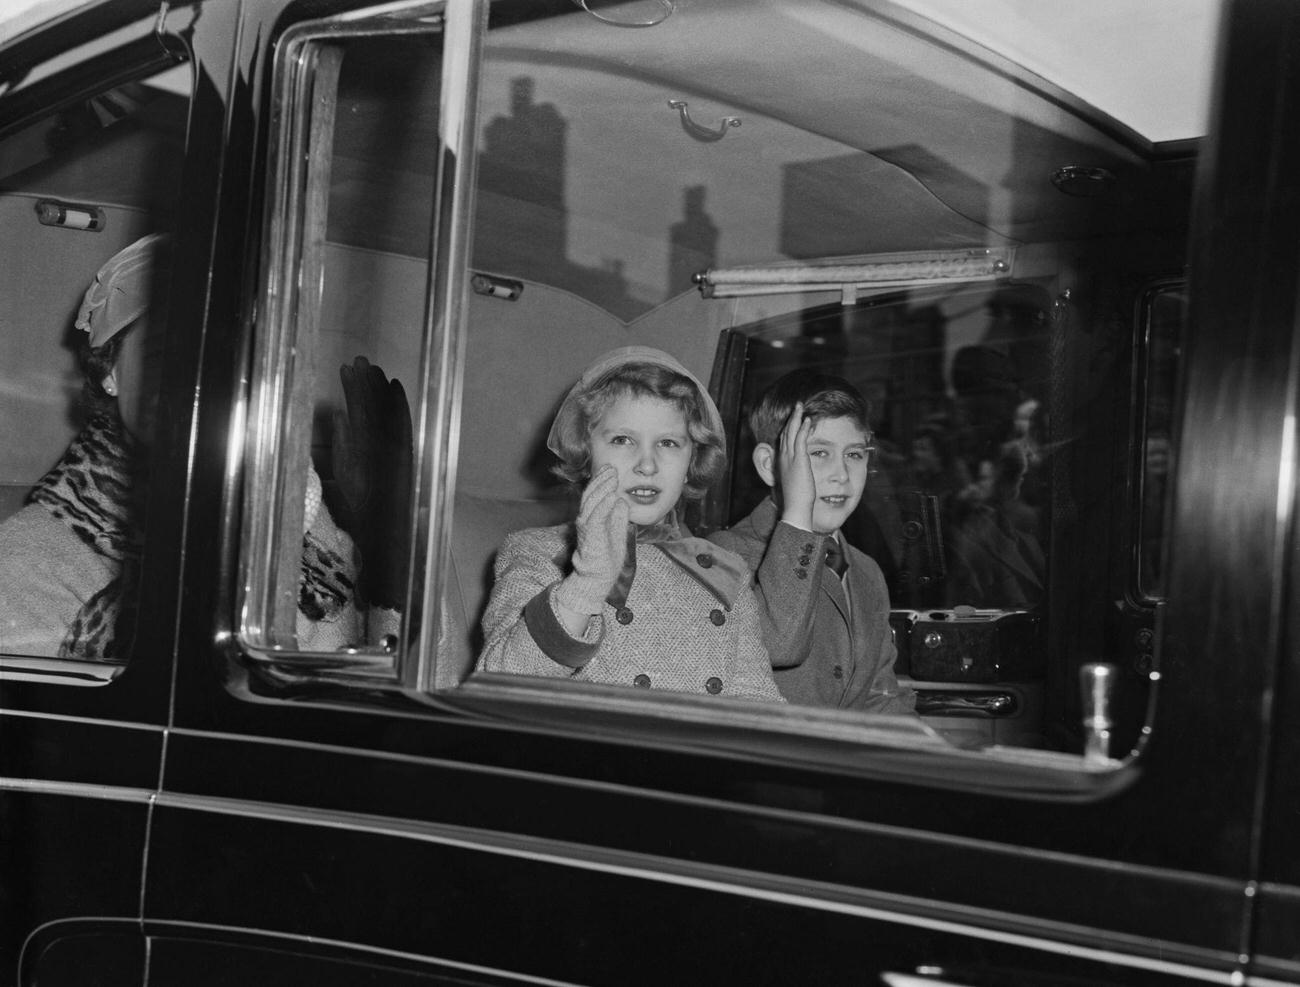 Princess Anne and her brother, Prince Charles (now King Charles III) arriving at Liverpool Street Station, London, 22nd December 1958.